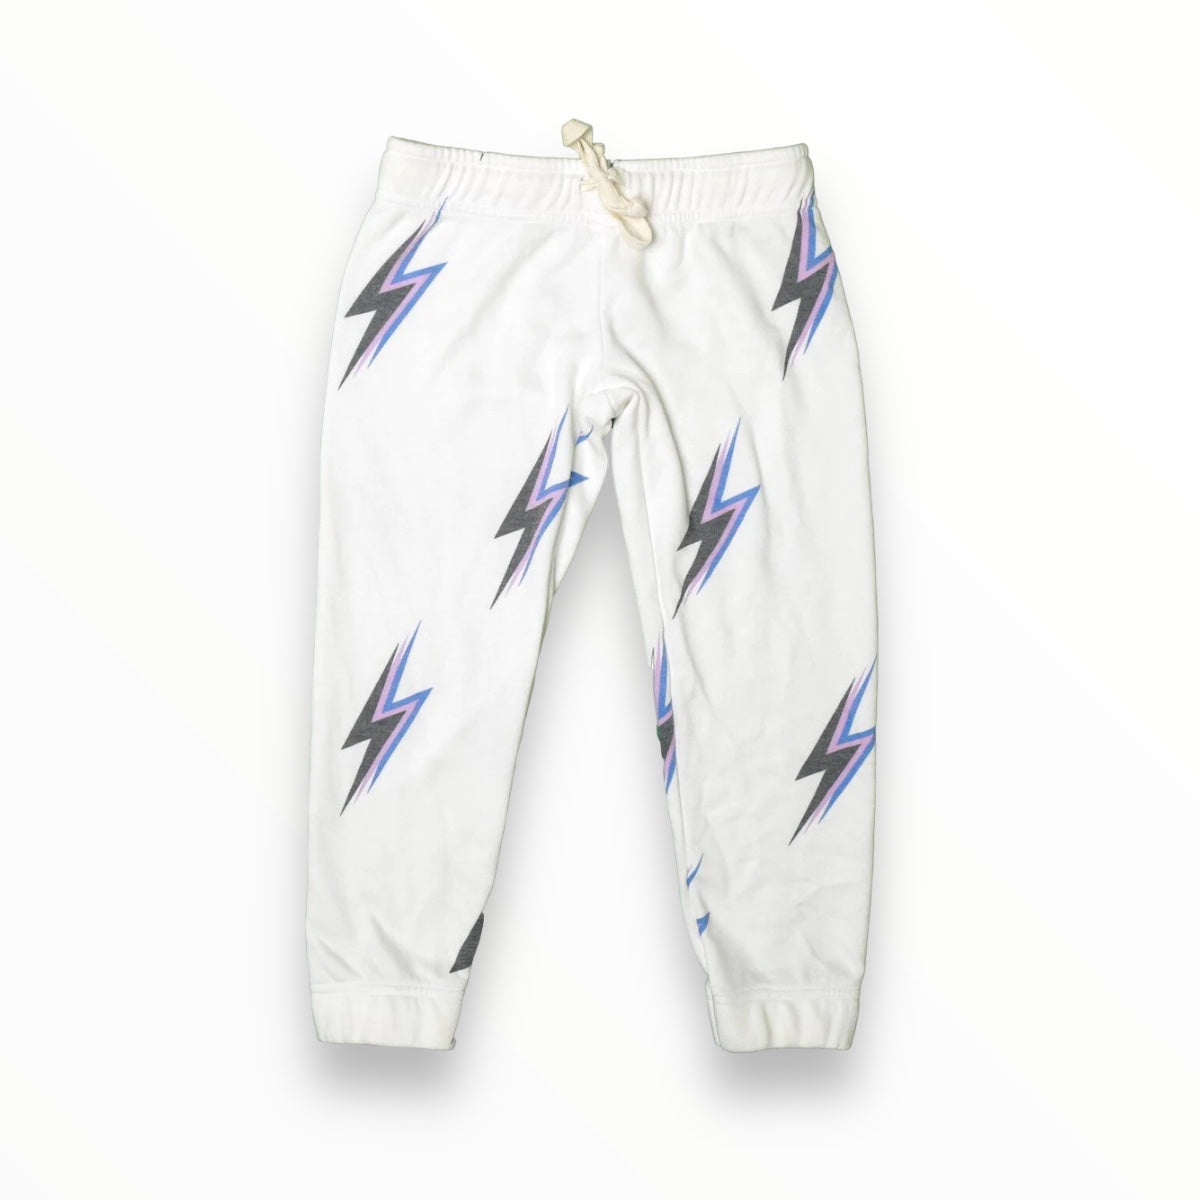 T2LOVE ATHLETIC ELSTIC WAIST/CUFF PANT - WHITE/LIGHTNING BOLTS